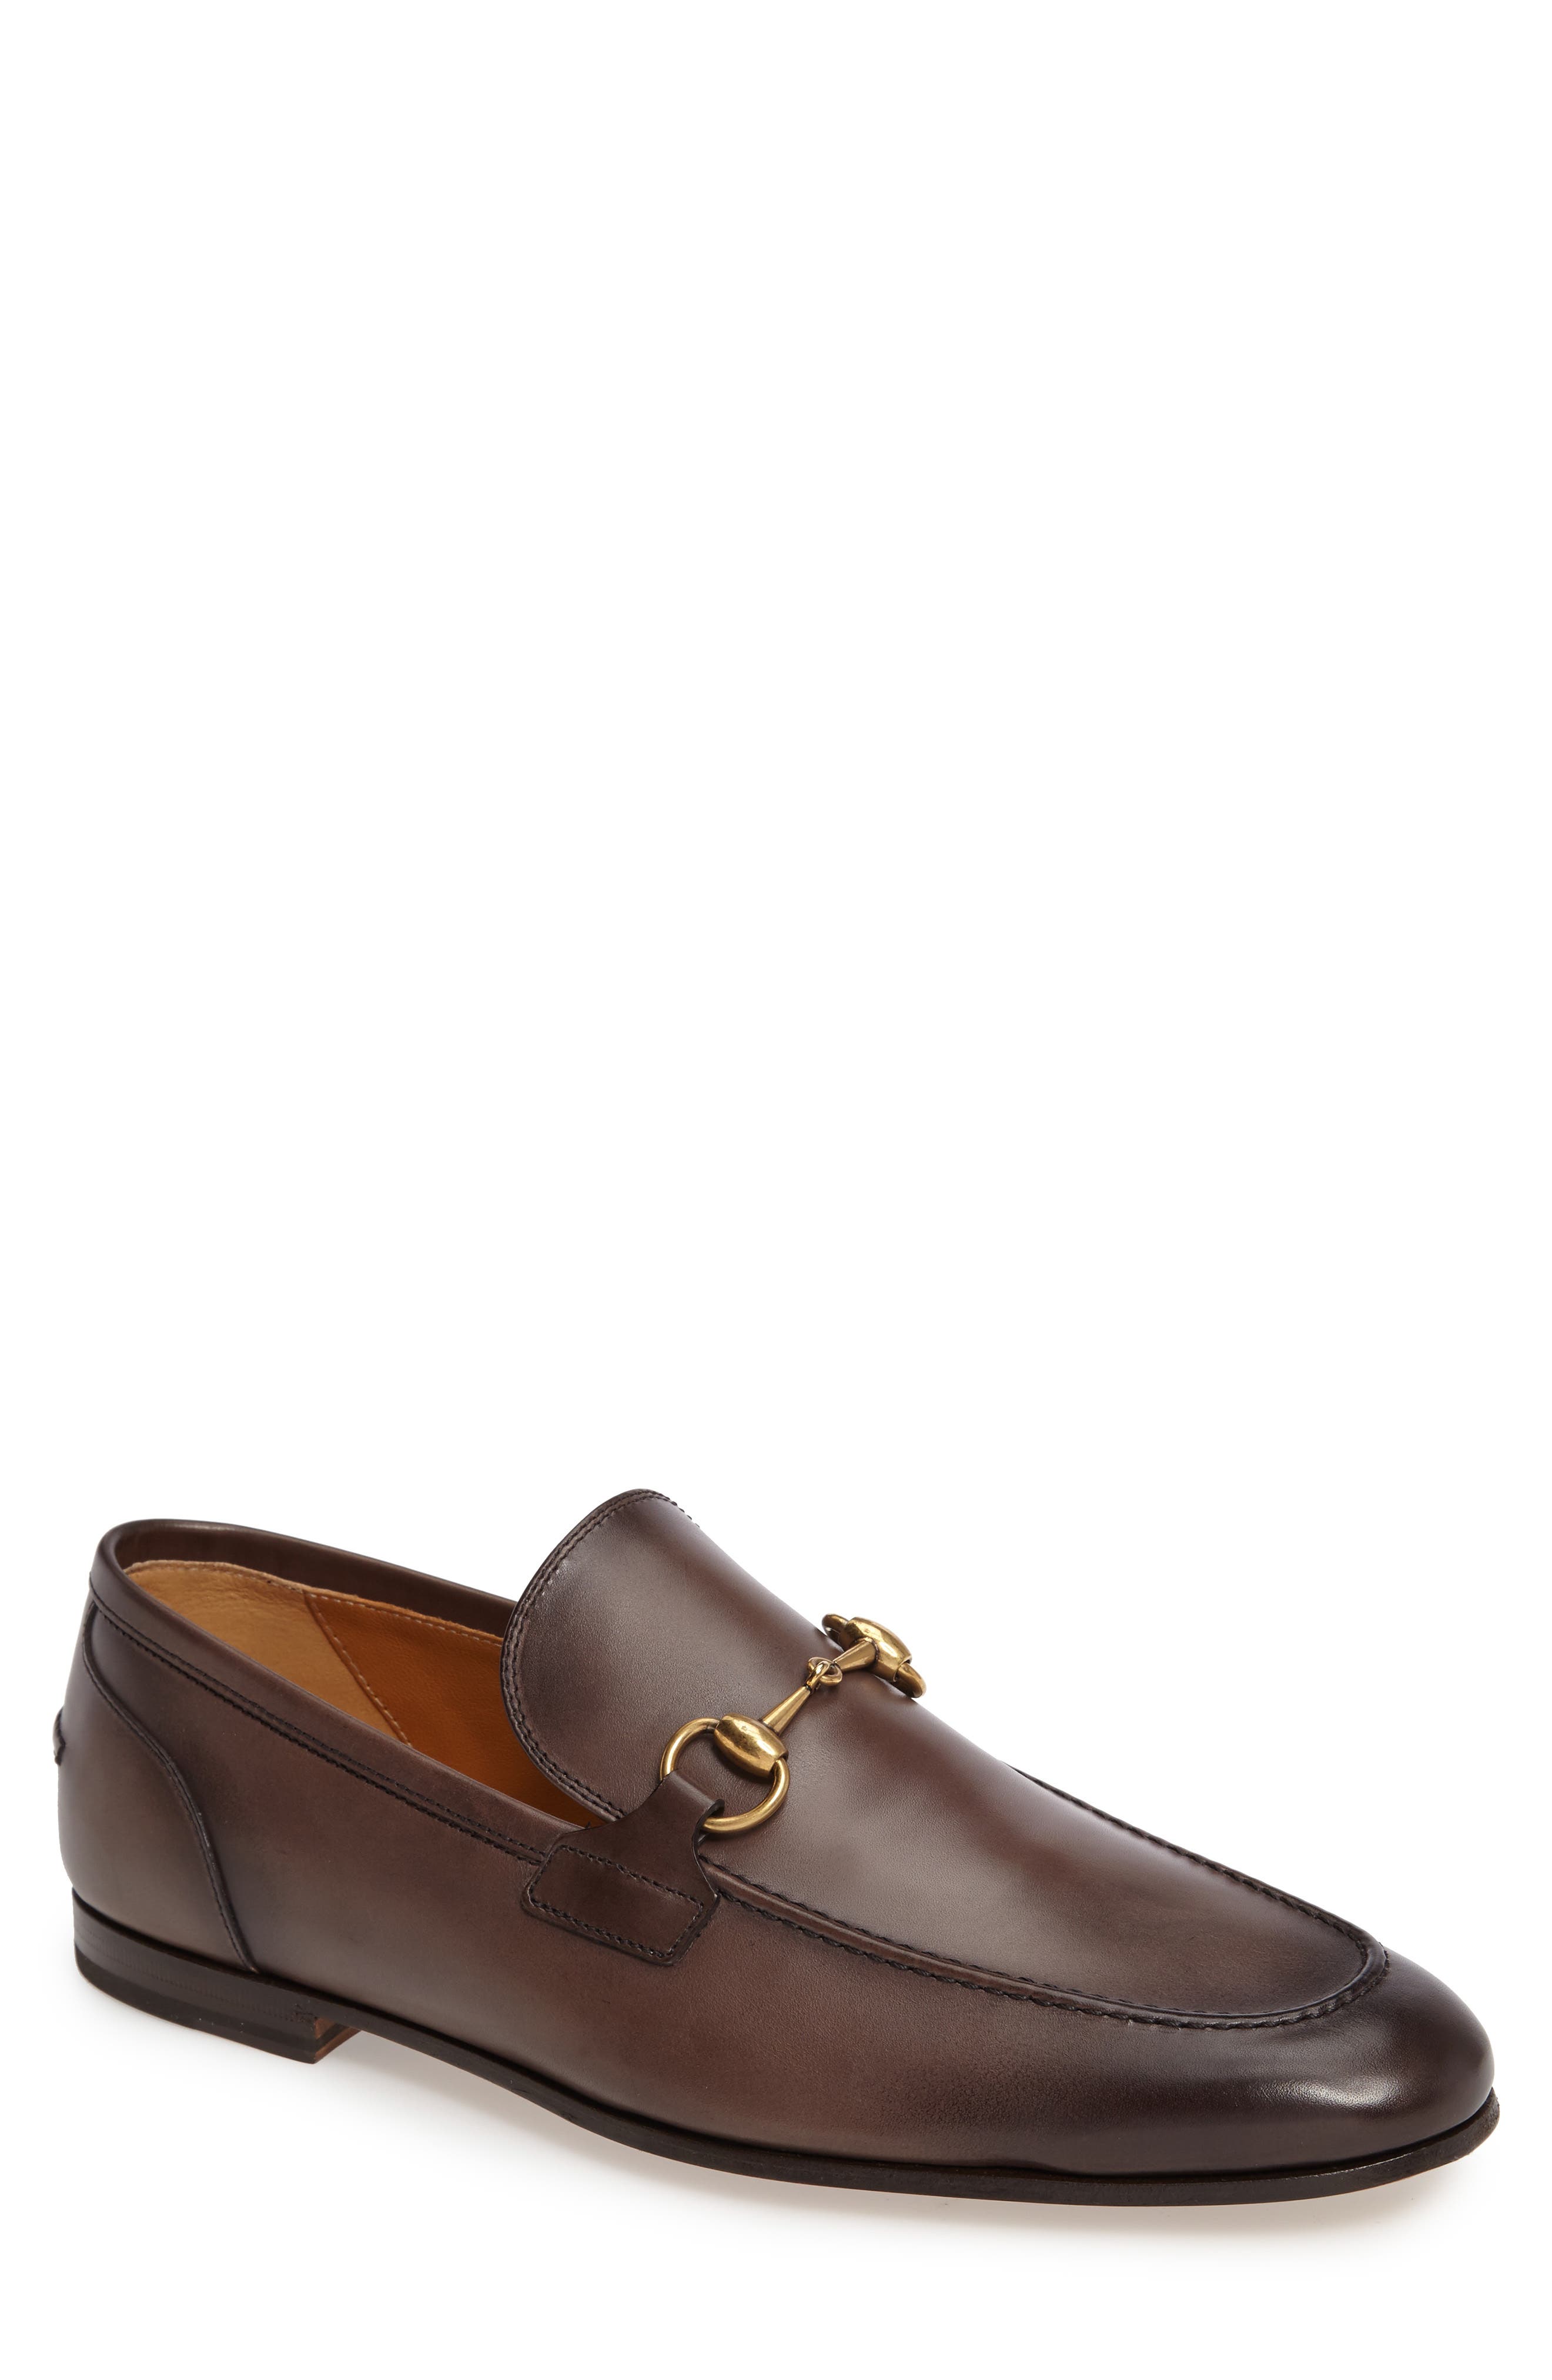 Brown Gucci Loafers Men Latvia, SAVE 52% - mpgc.net